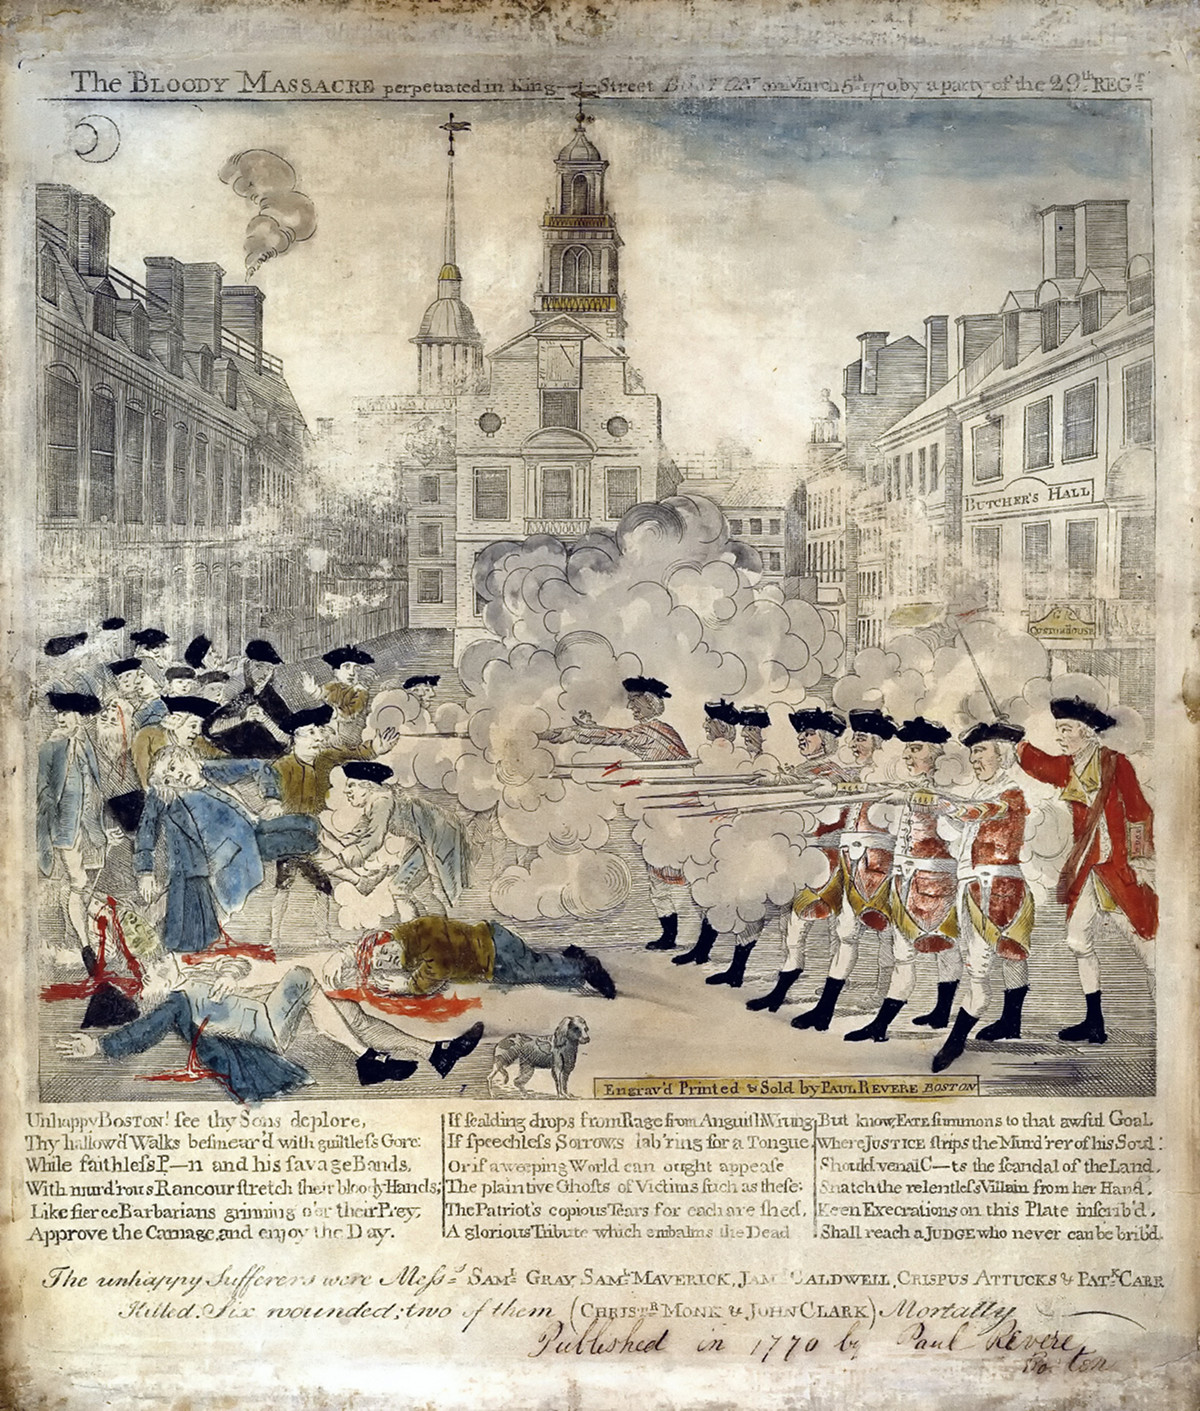 The bloody massacre perpetrated in King Street Boston on March 5th 1770 by a party of the 29th Regt.